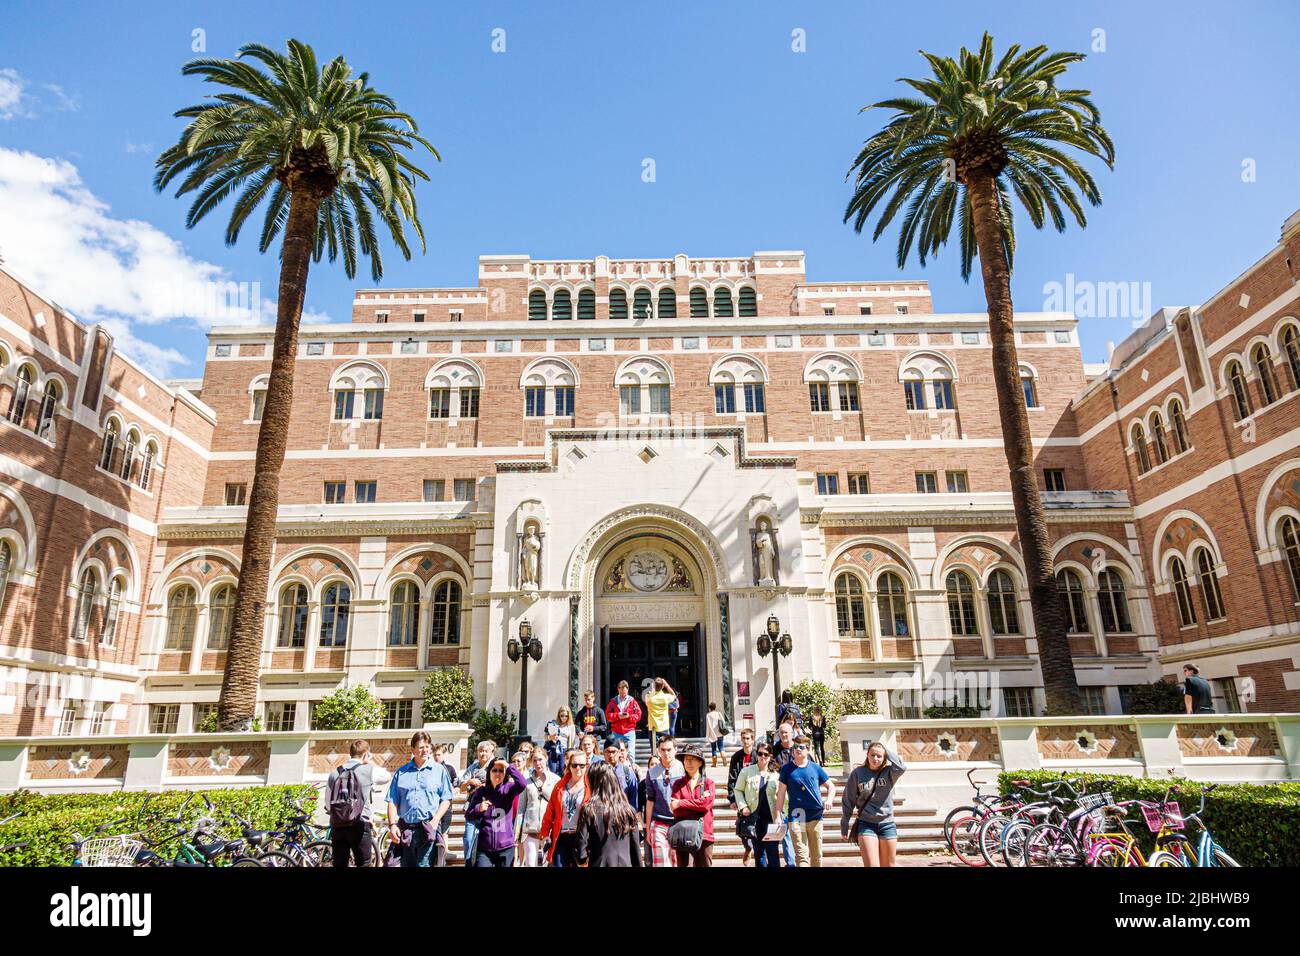 Los Angeles California,USC,University of Southern California,Doheny Library,students boys girls teen teens teenagers campus walking tour,orientation Stock Photo